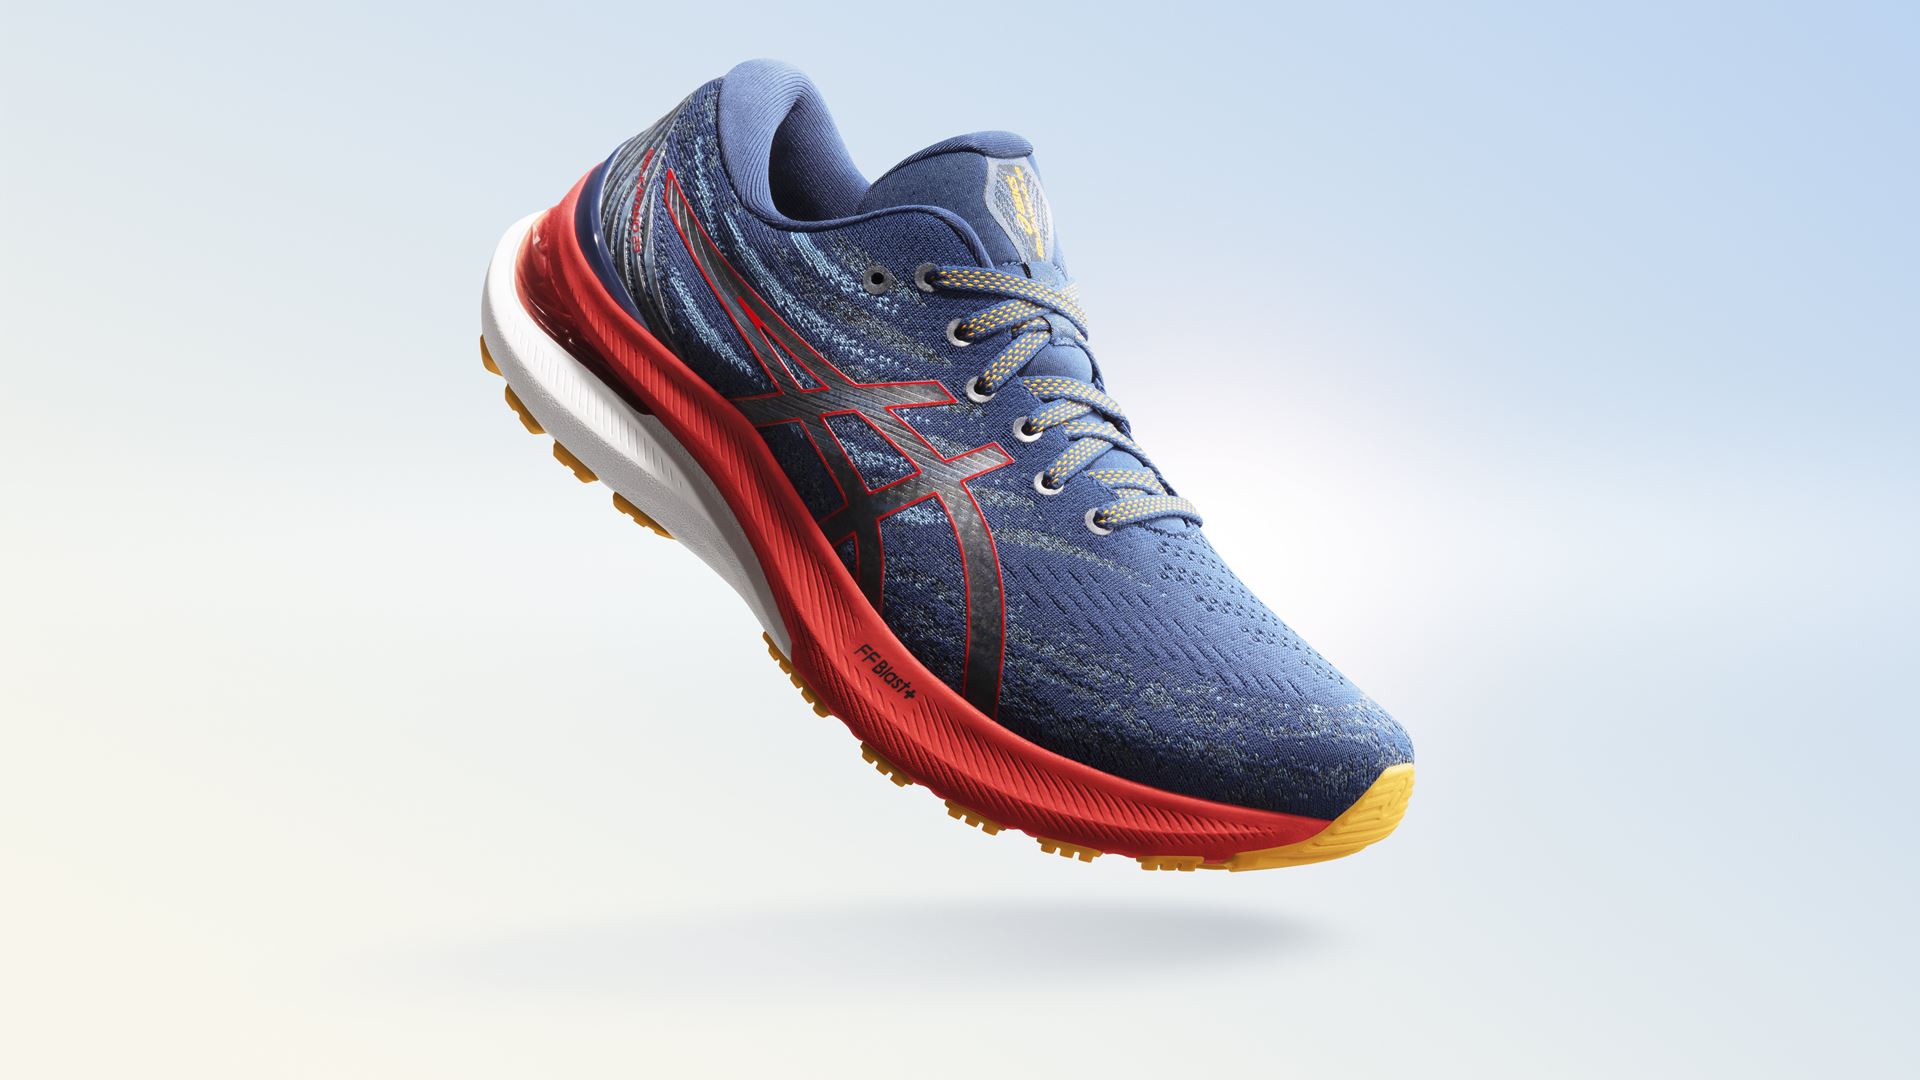 ASICS launches the GEL-KAYANO™ 29 running shoe to energise your run whatever the distance